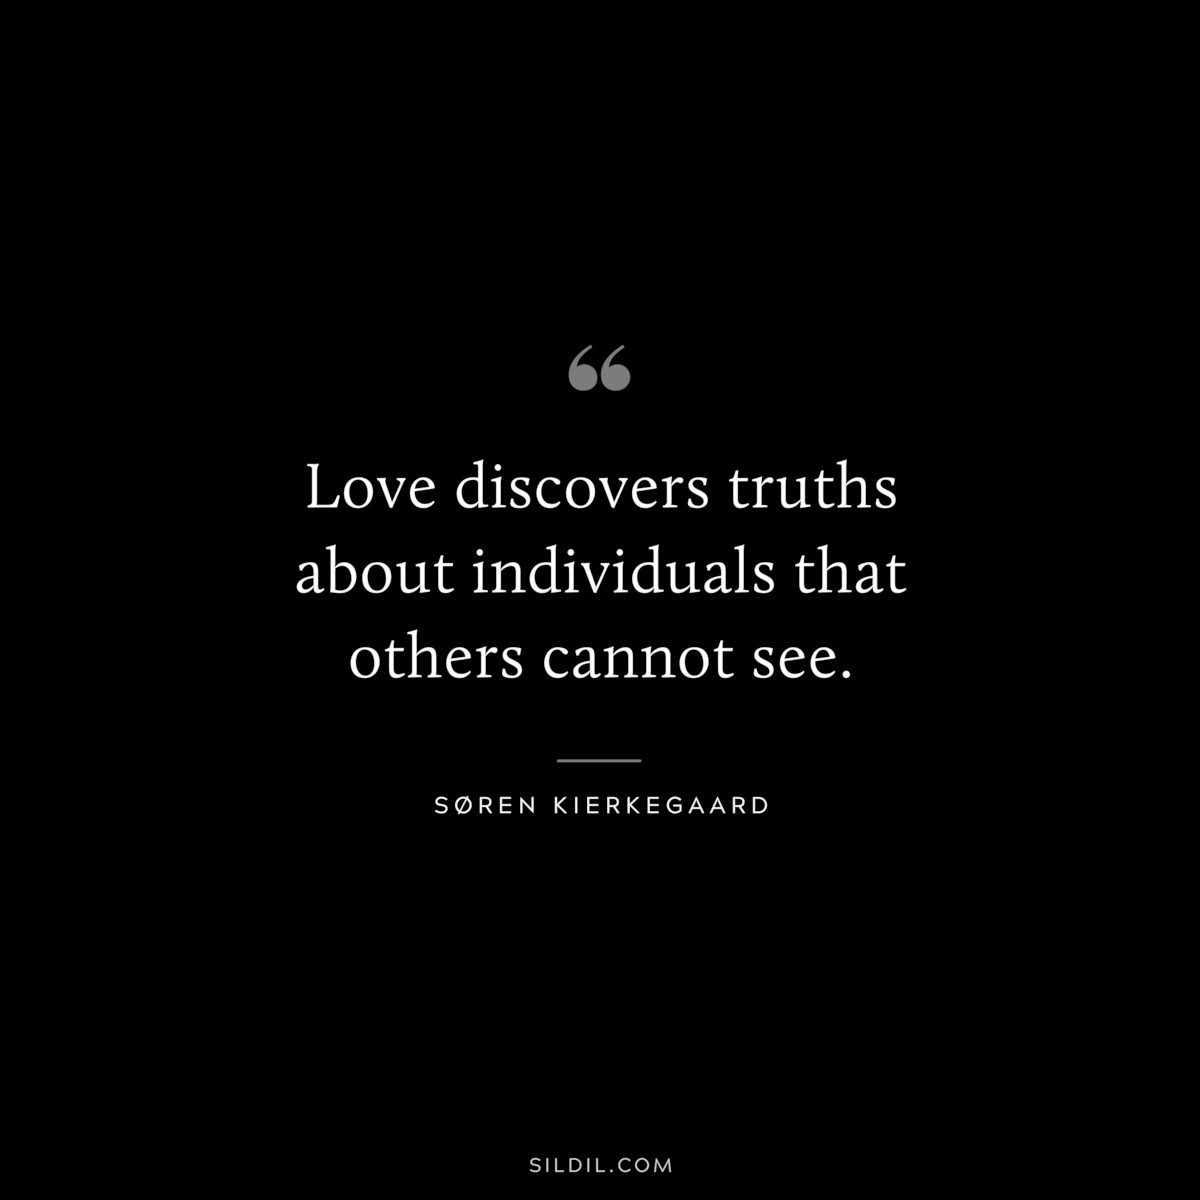 Love discovers truths about individuals that others cannot see. ― Søren Kierkegaard